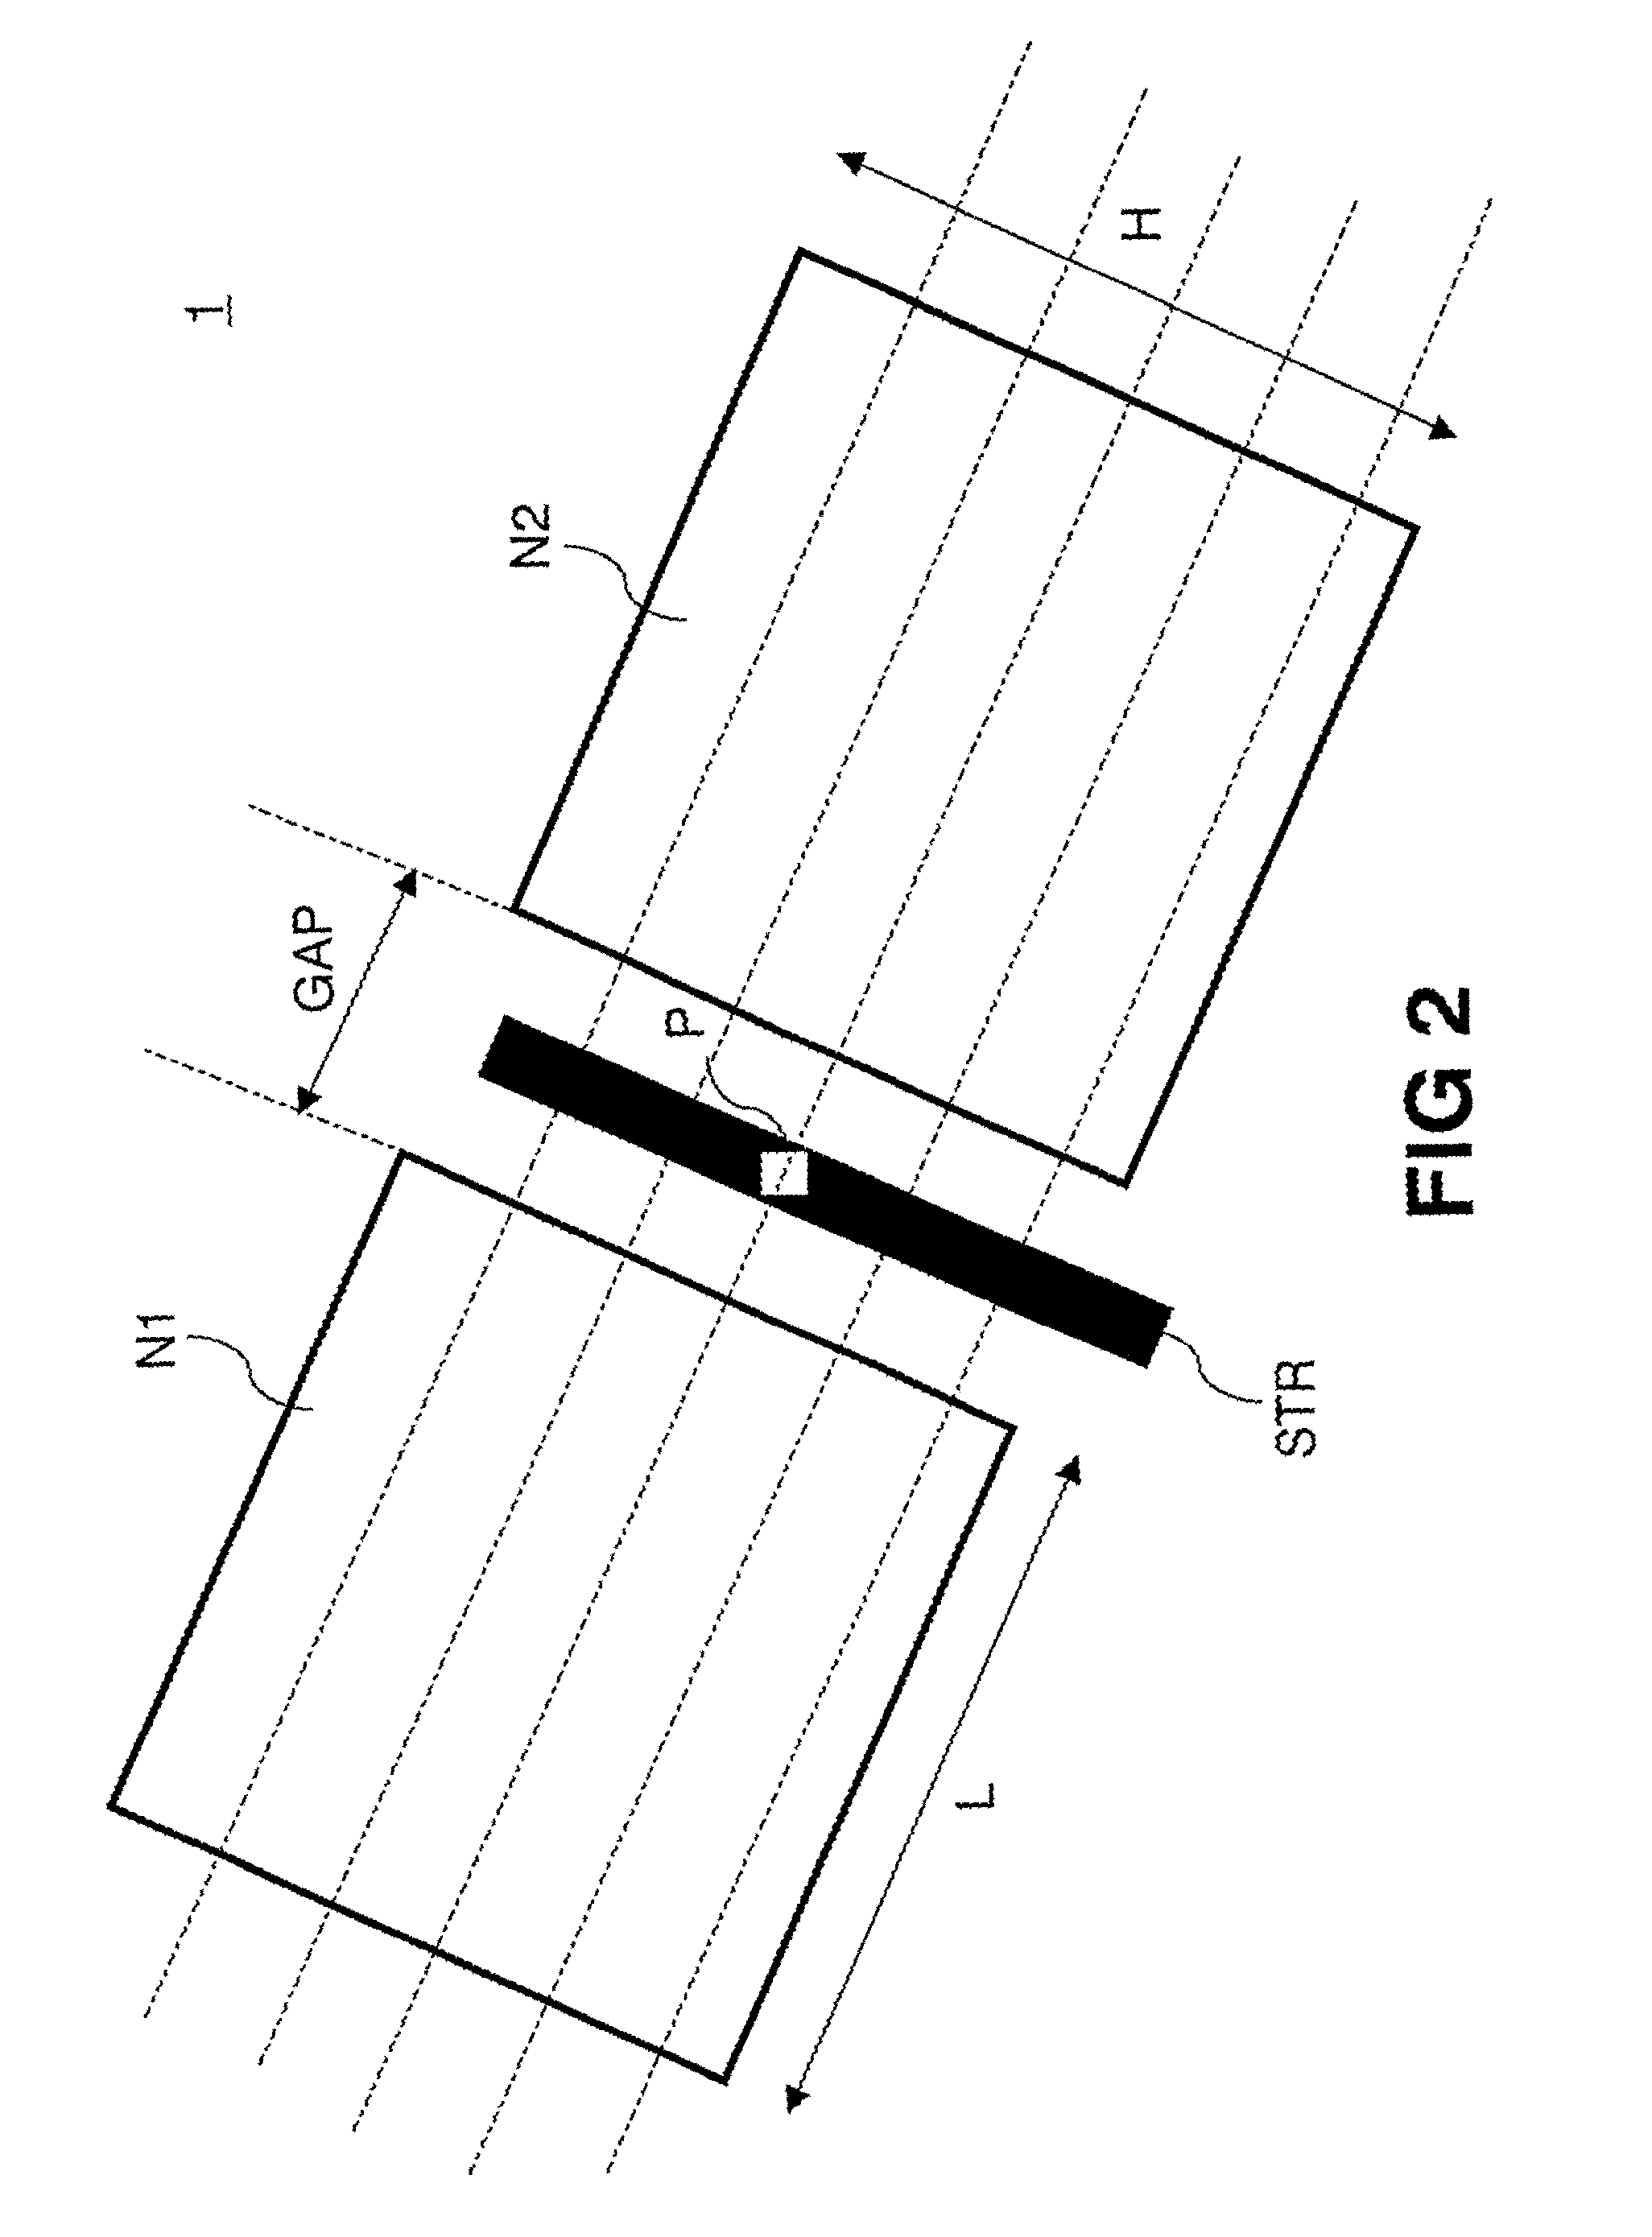 Method of processing images